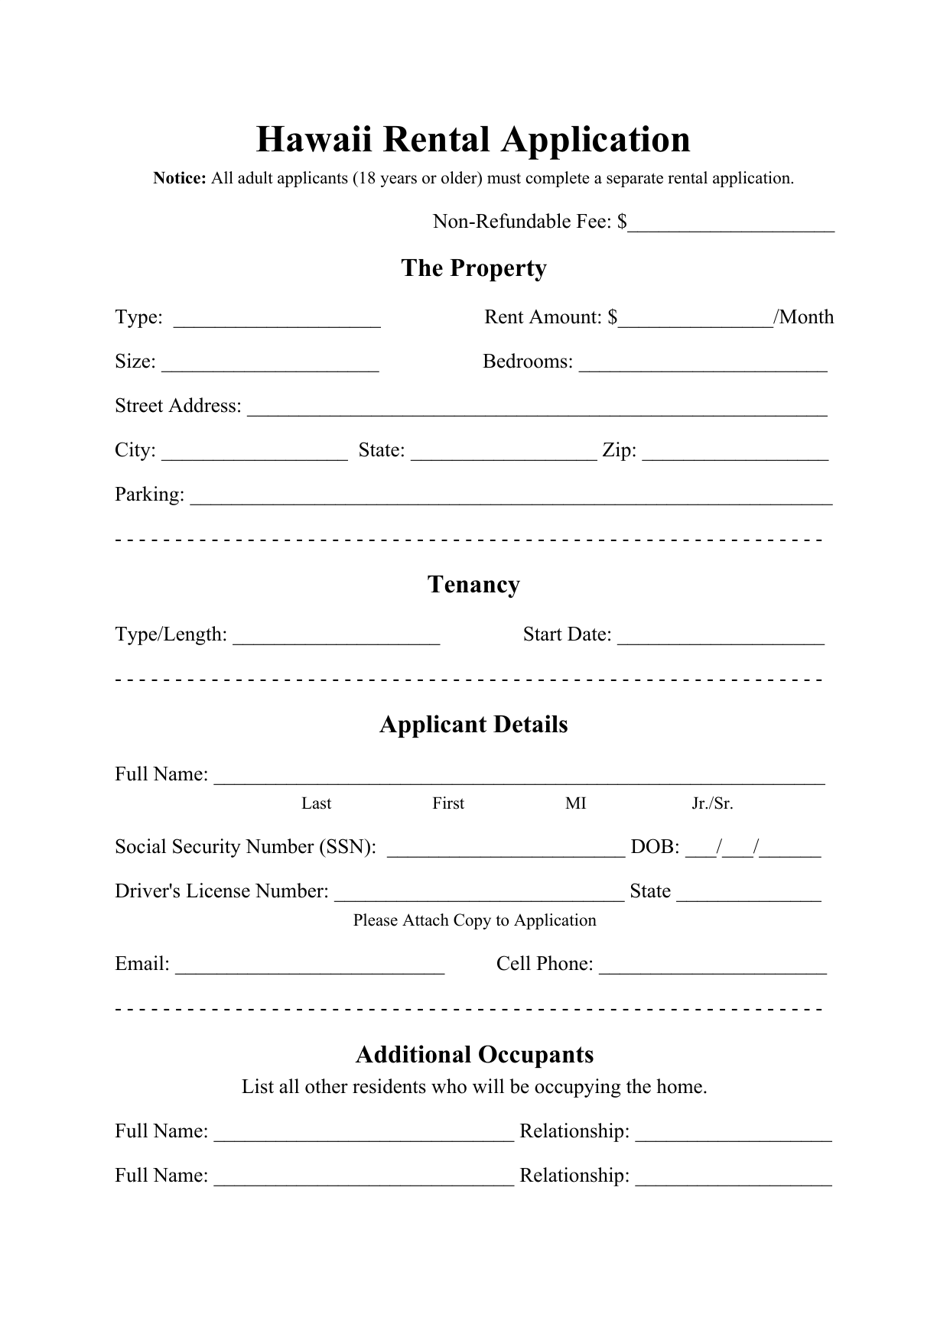 Hawaii Rental Application Form Fill Out, Sign Online and Download PDF